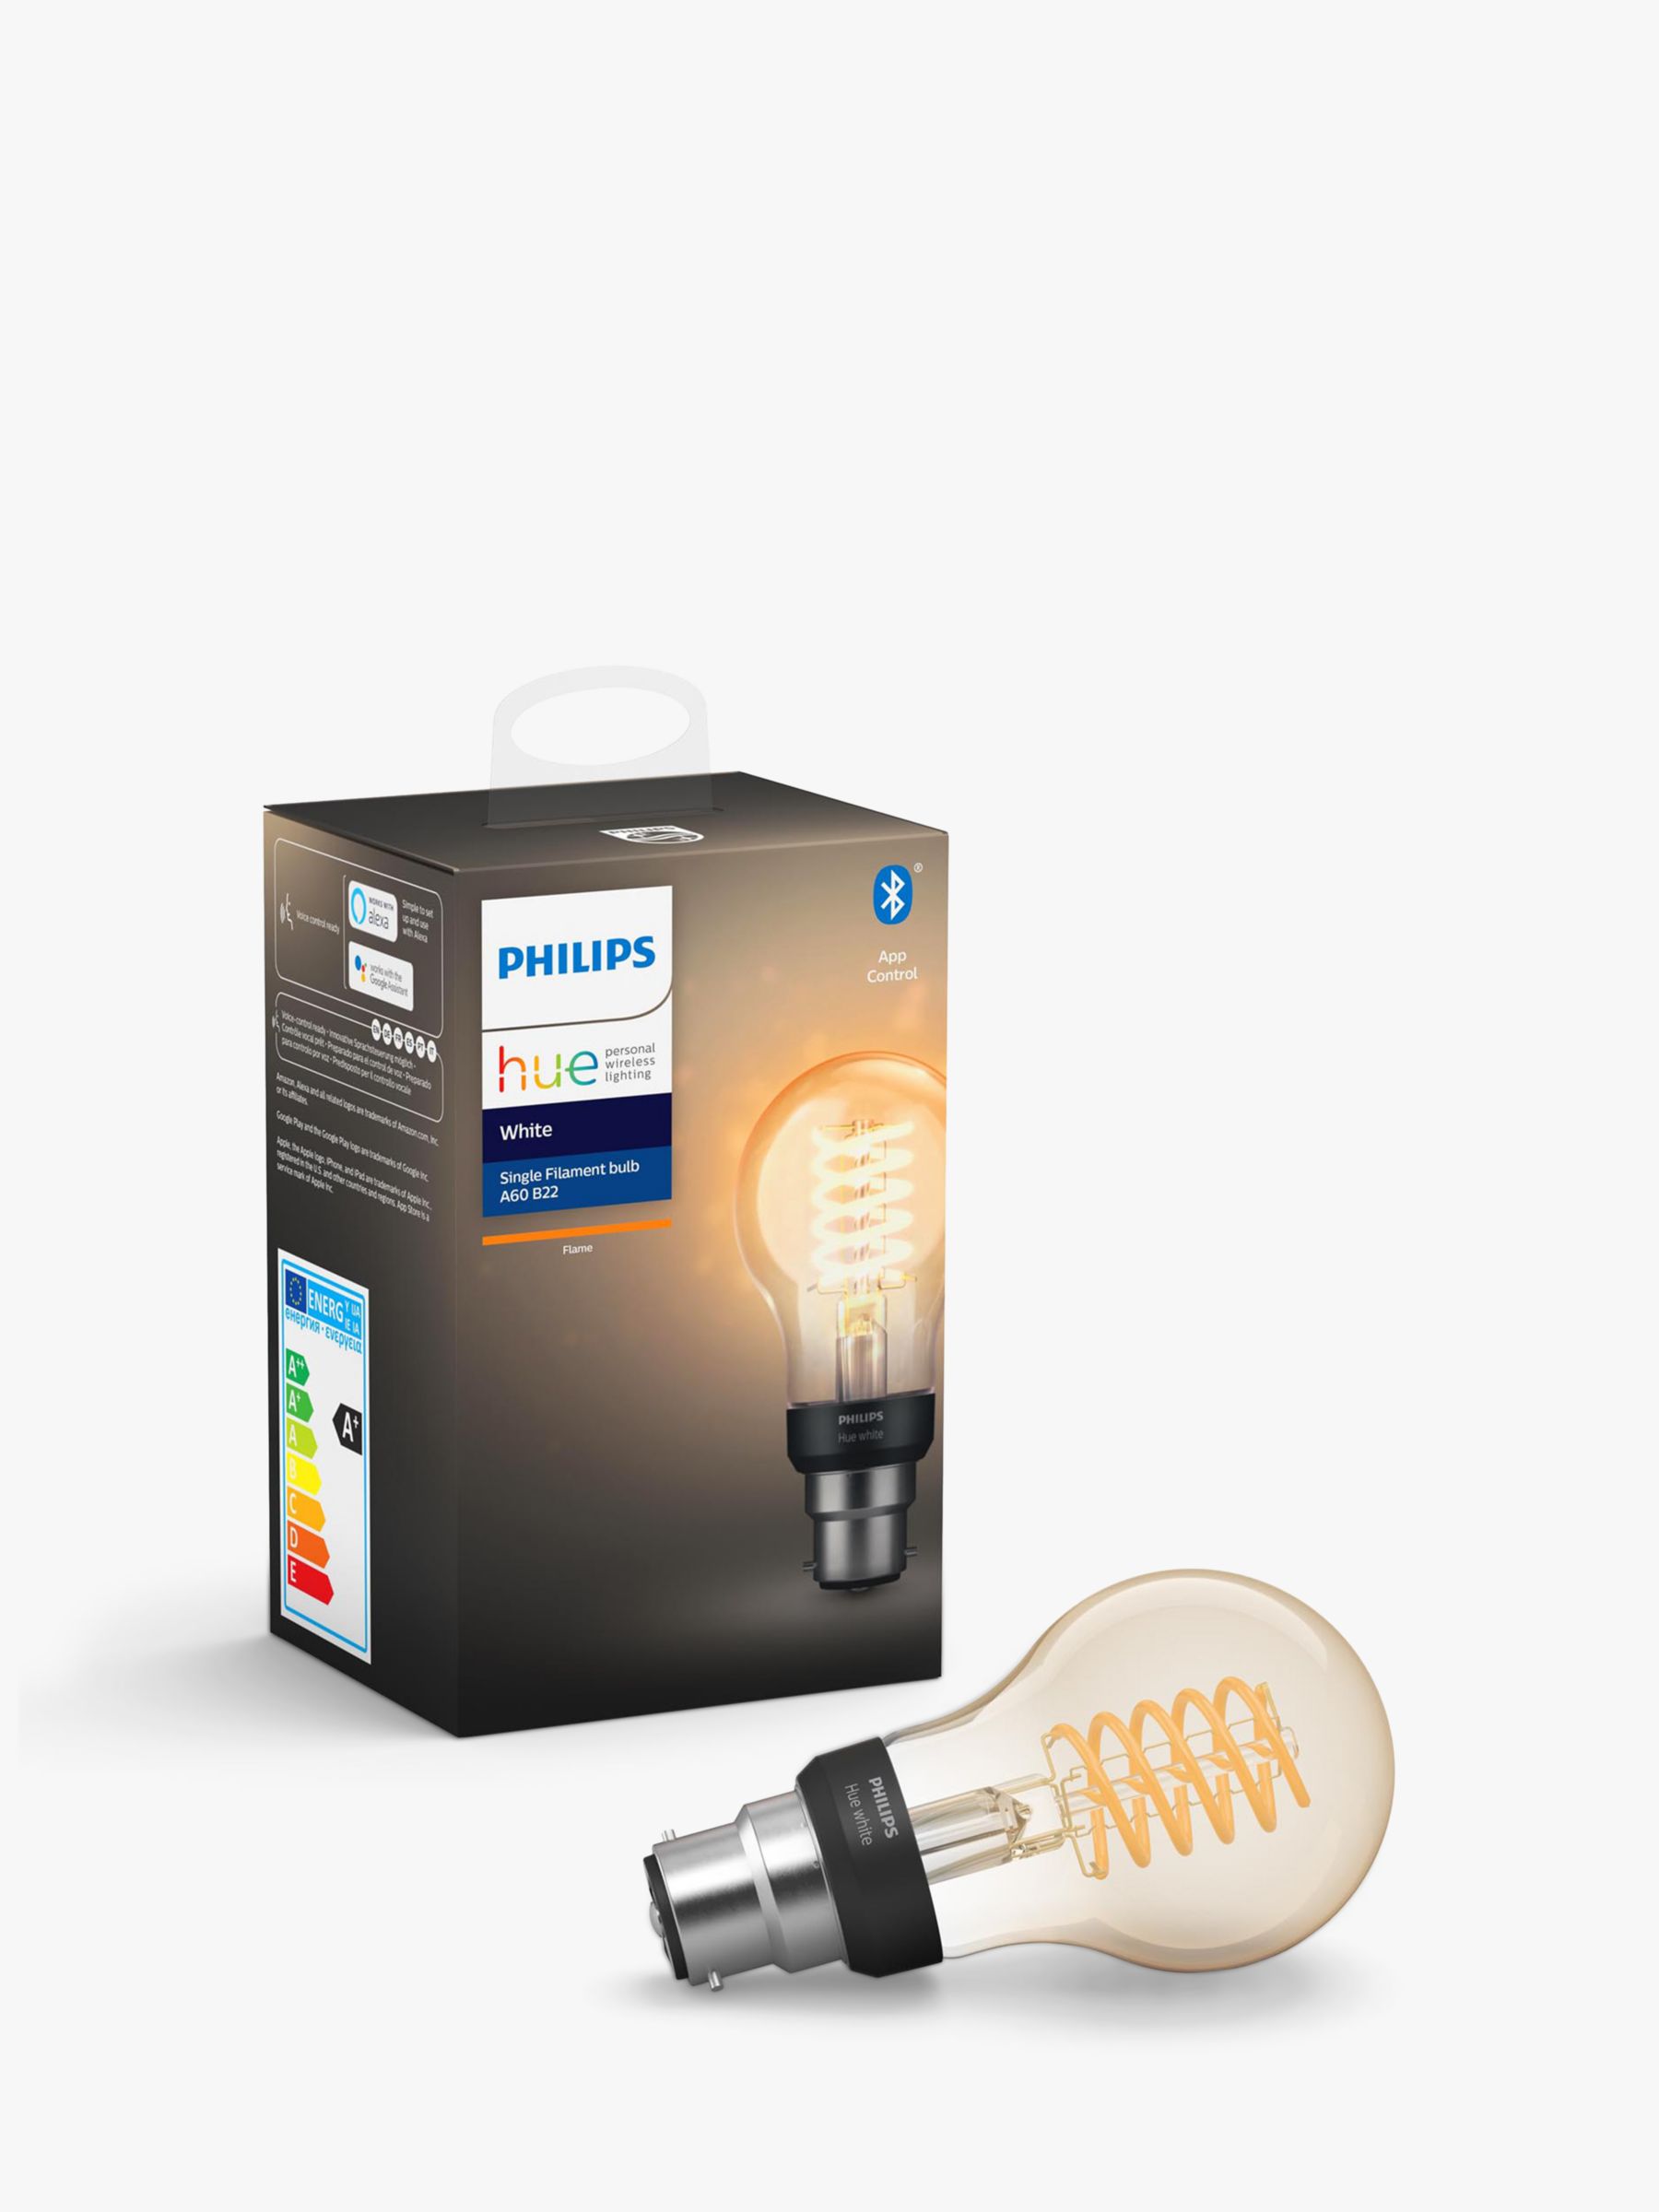 Photo of Philips hue white 7w b22 led dimmable smart classic filament bulb with bluetooth